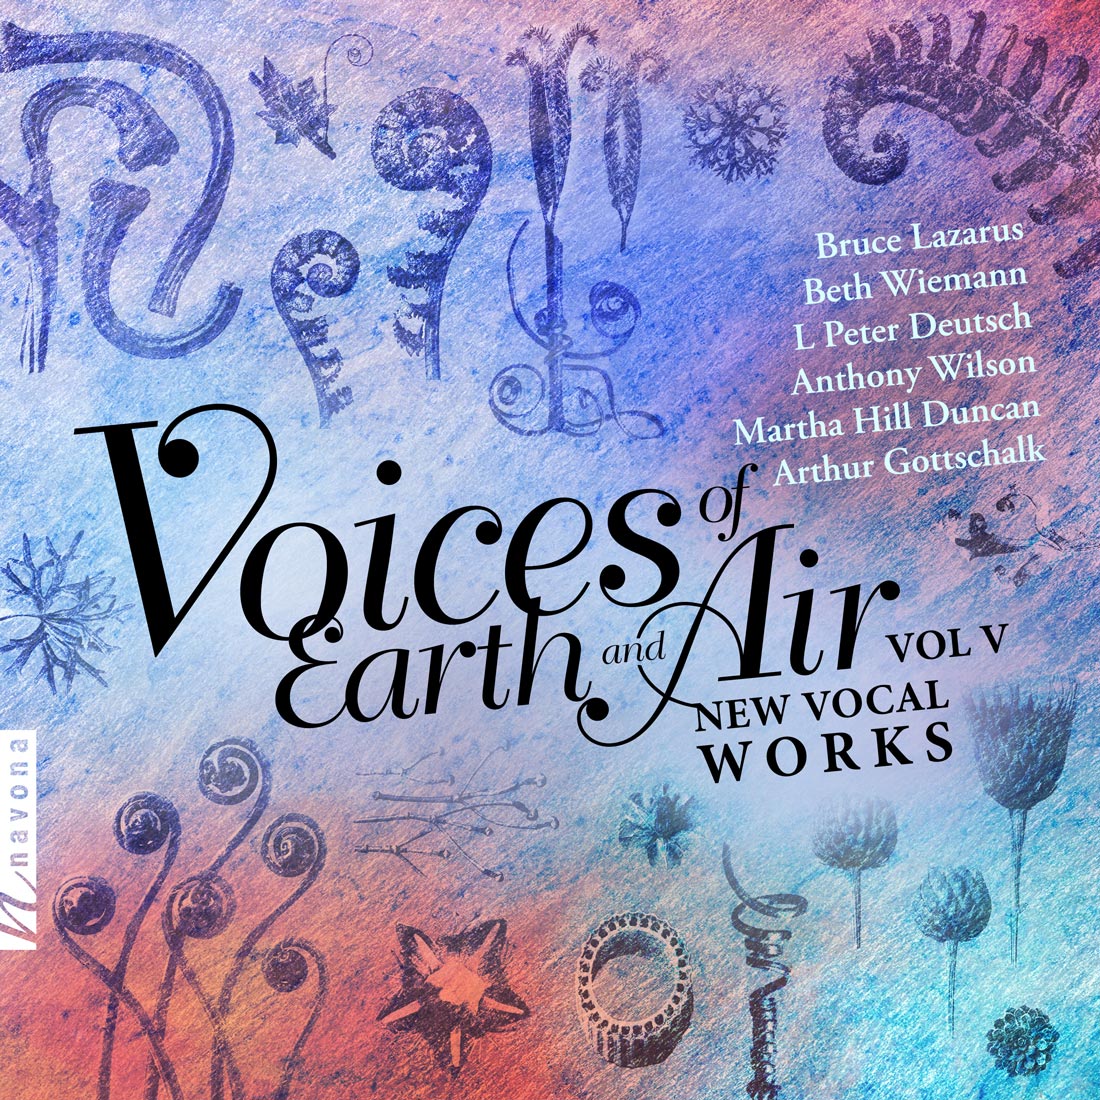 Voices of Earth and Air Vol V - Album Cover